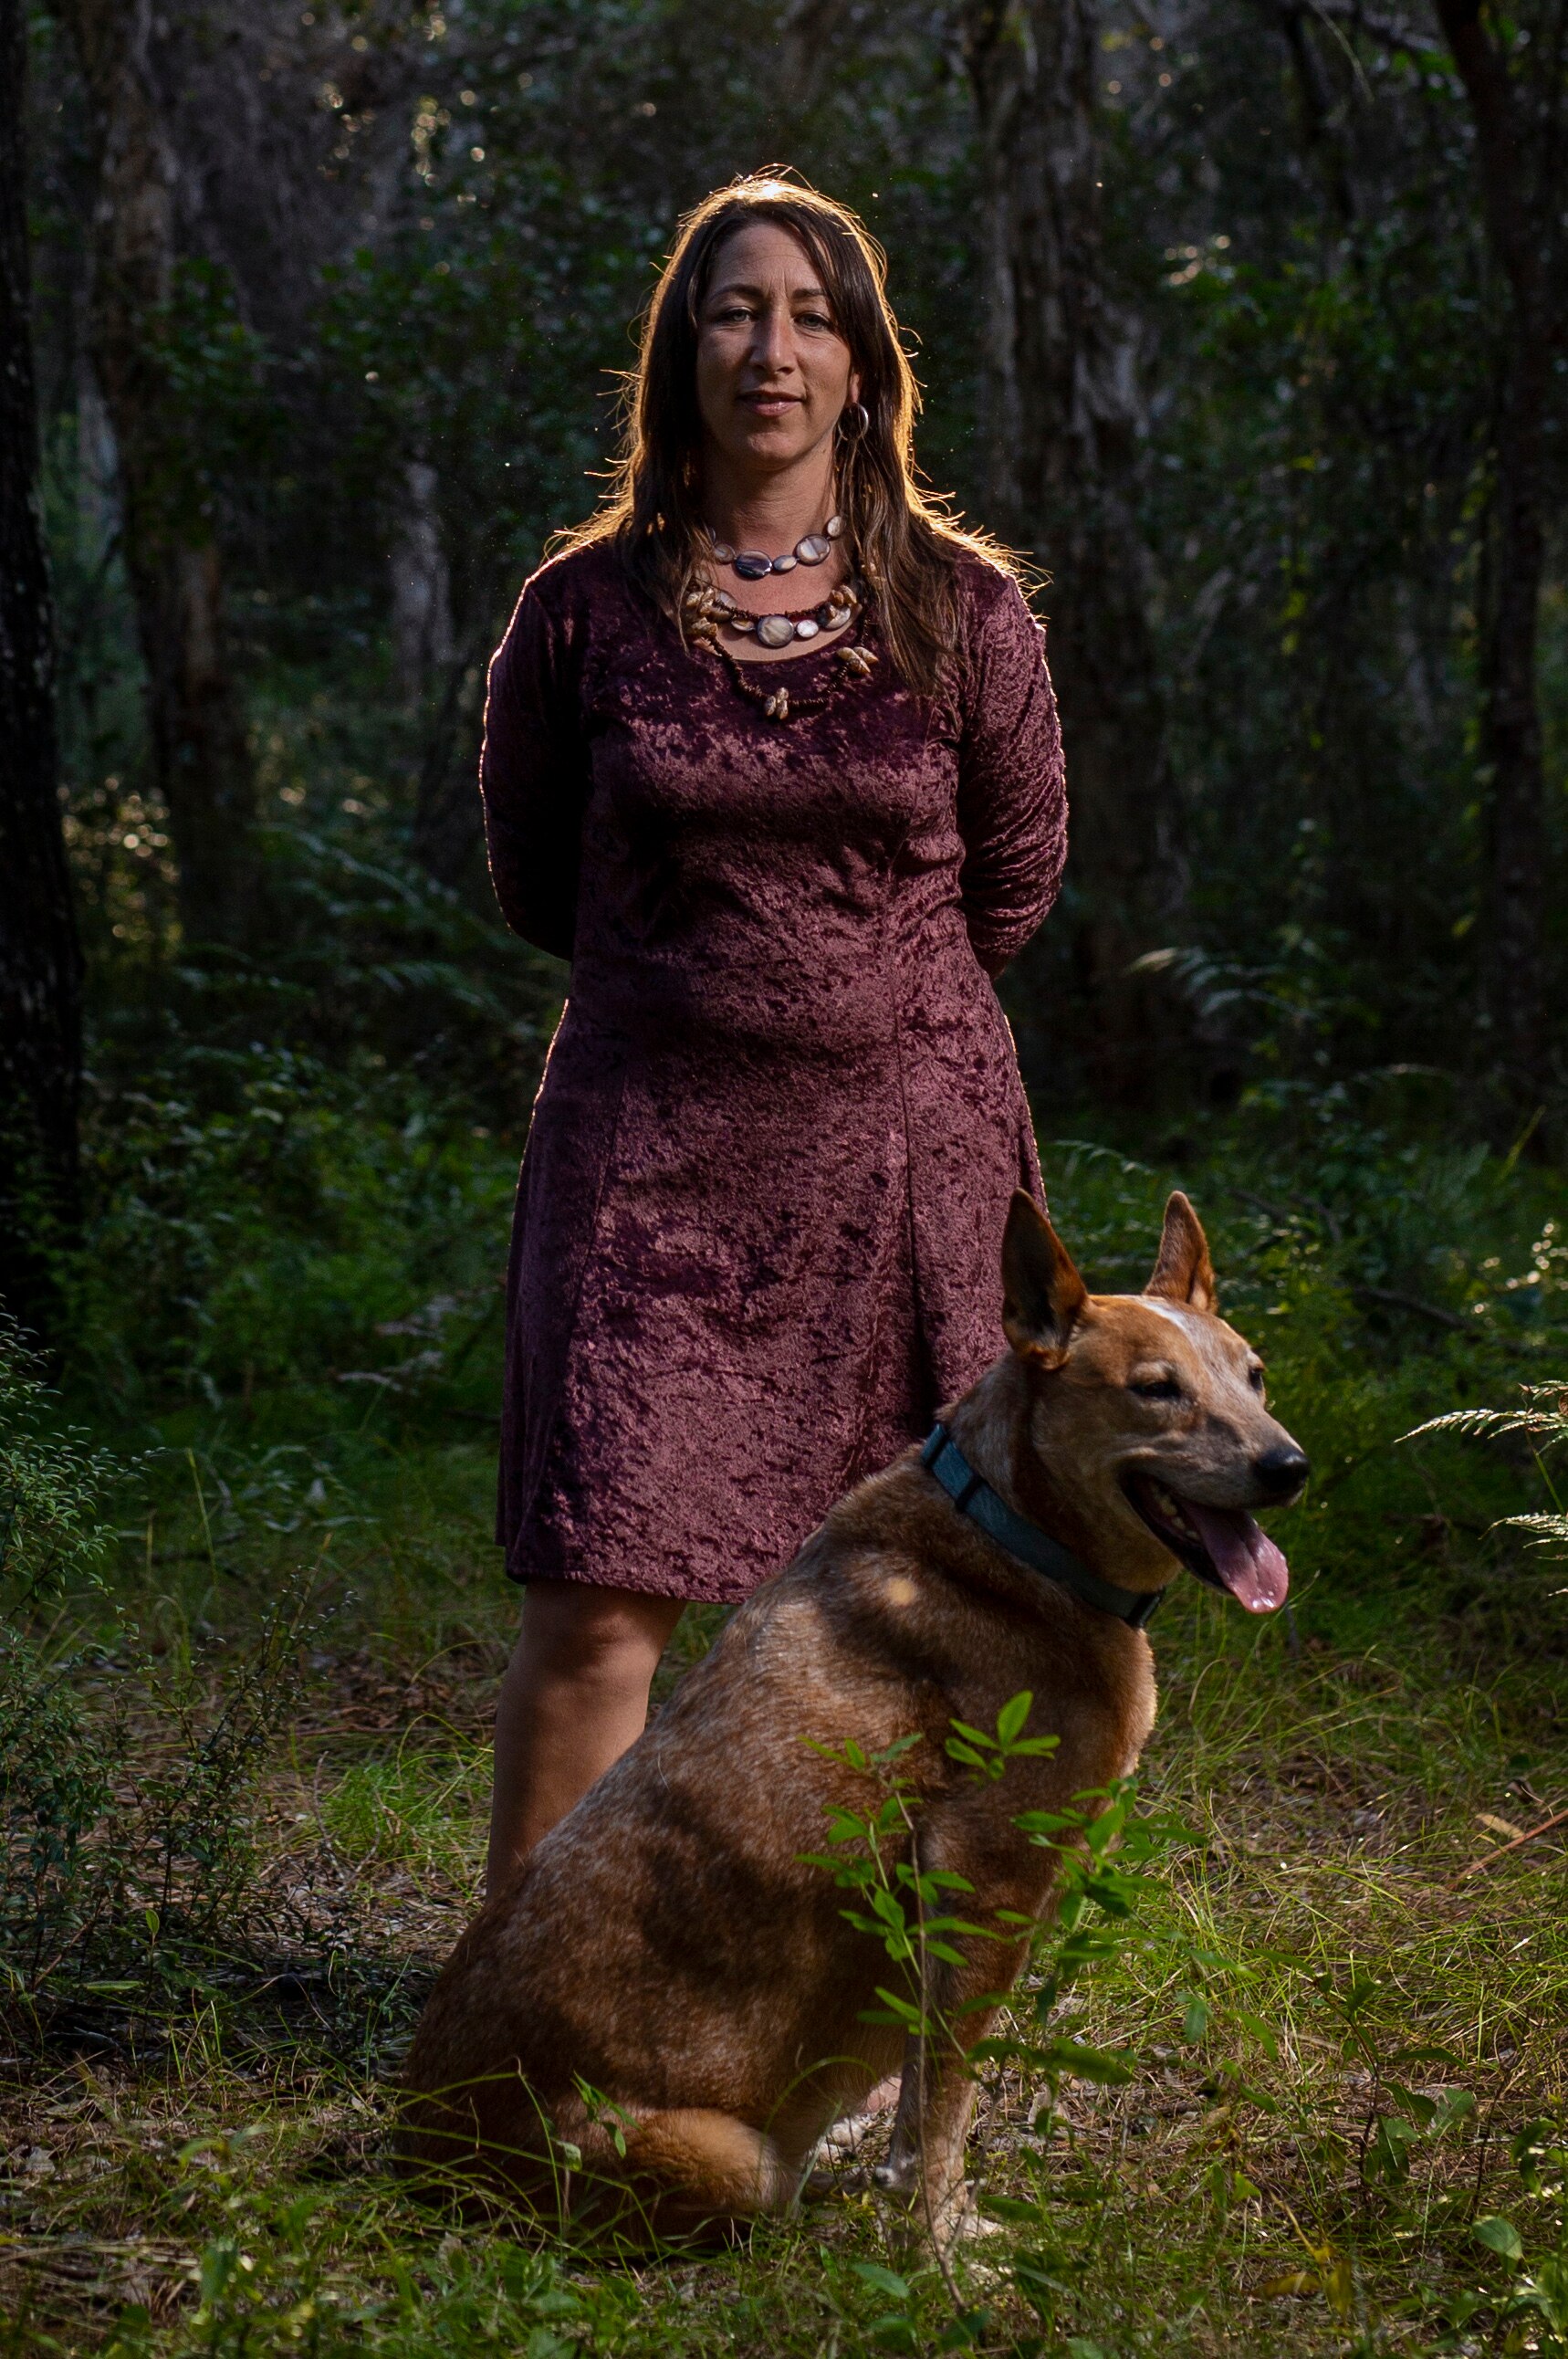 A long-haired brunette Aboriginal woman stands with her arms behind her back in dense forest, a dog sitting at her feet